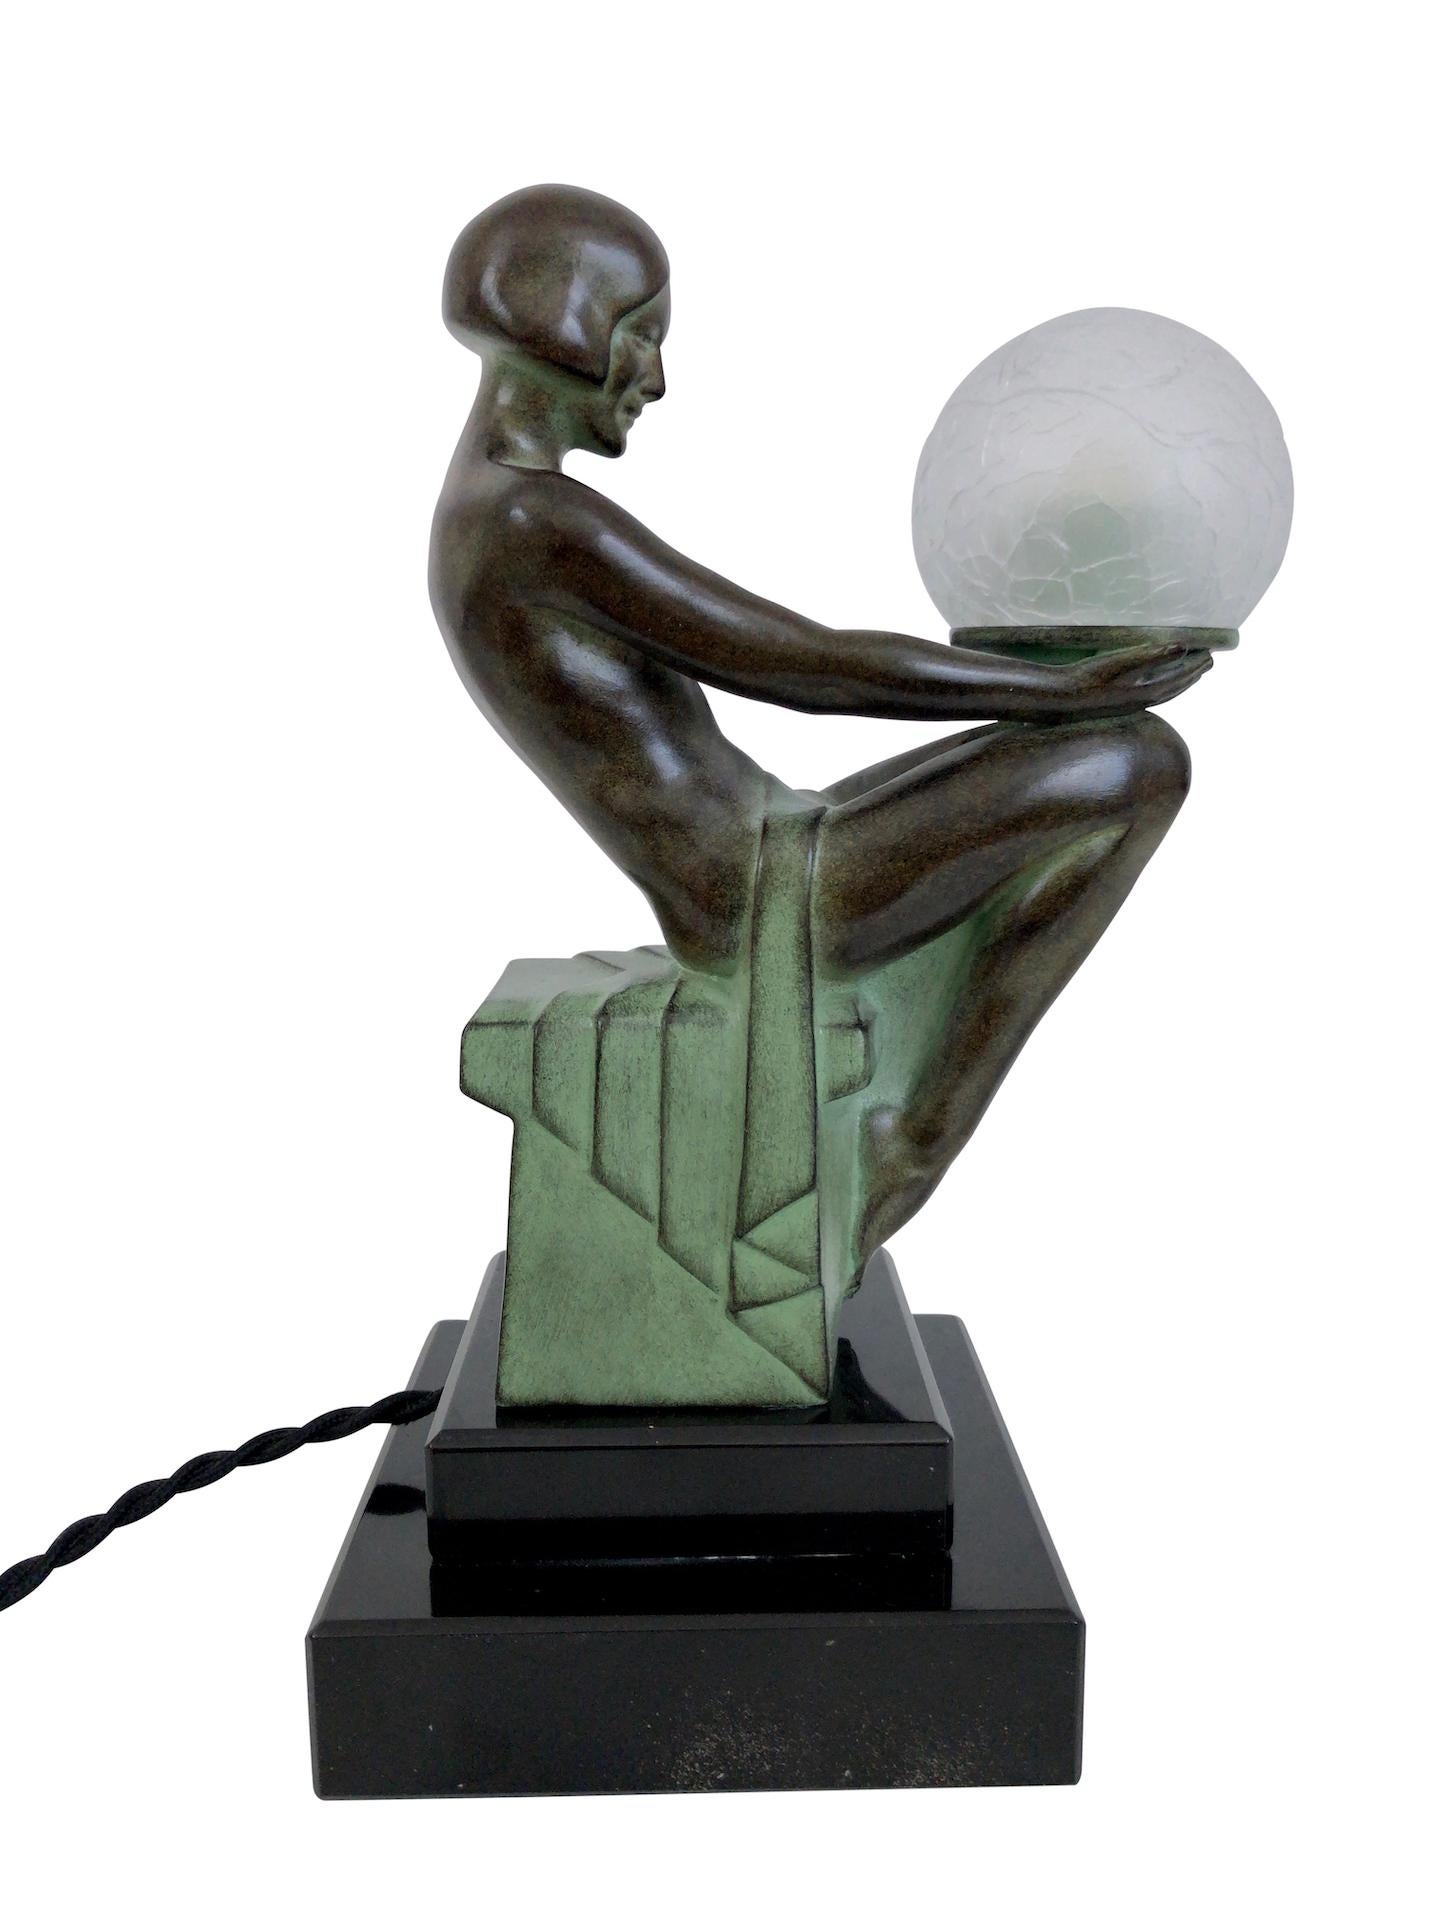 Delassement Lumineux French Art Deco Style Nude Sculpture Lamp by Max Le Verrier 5